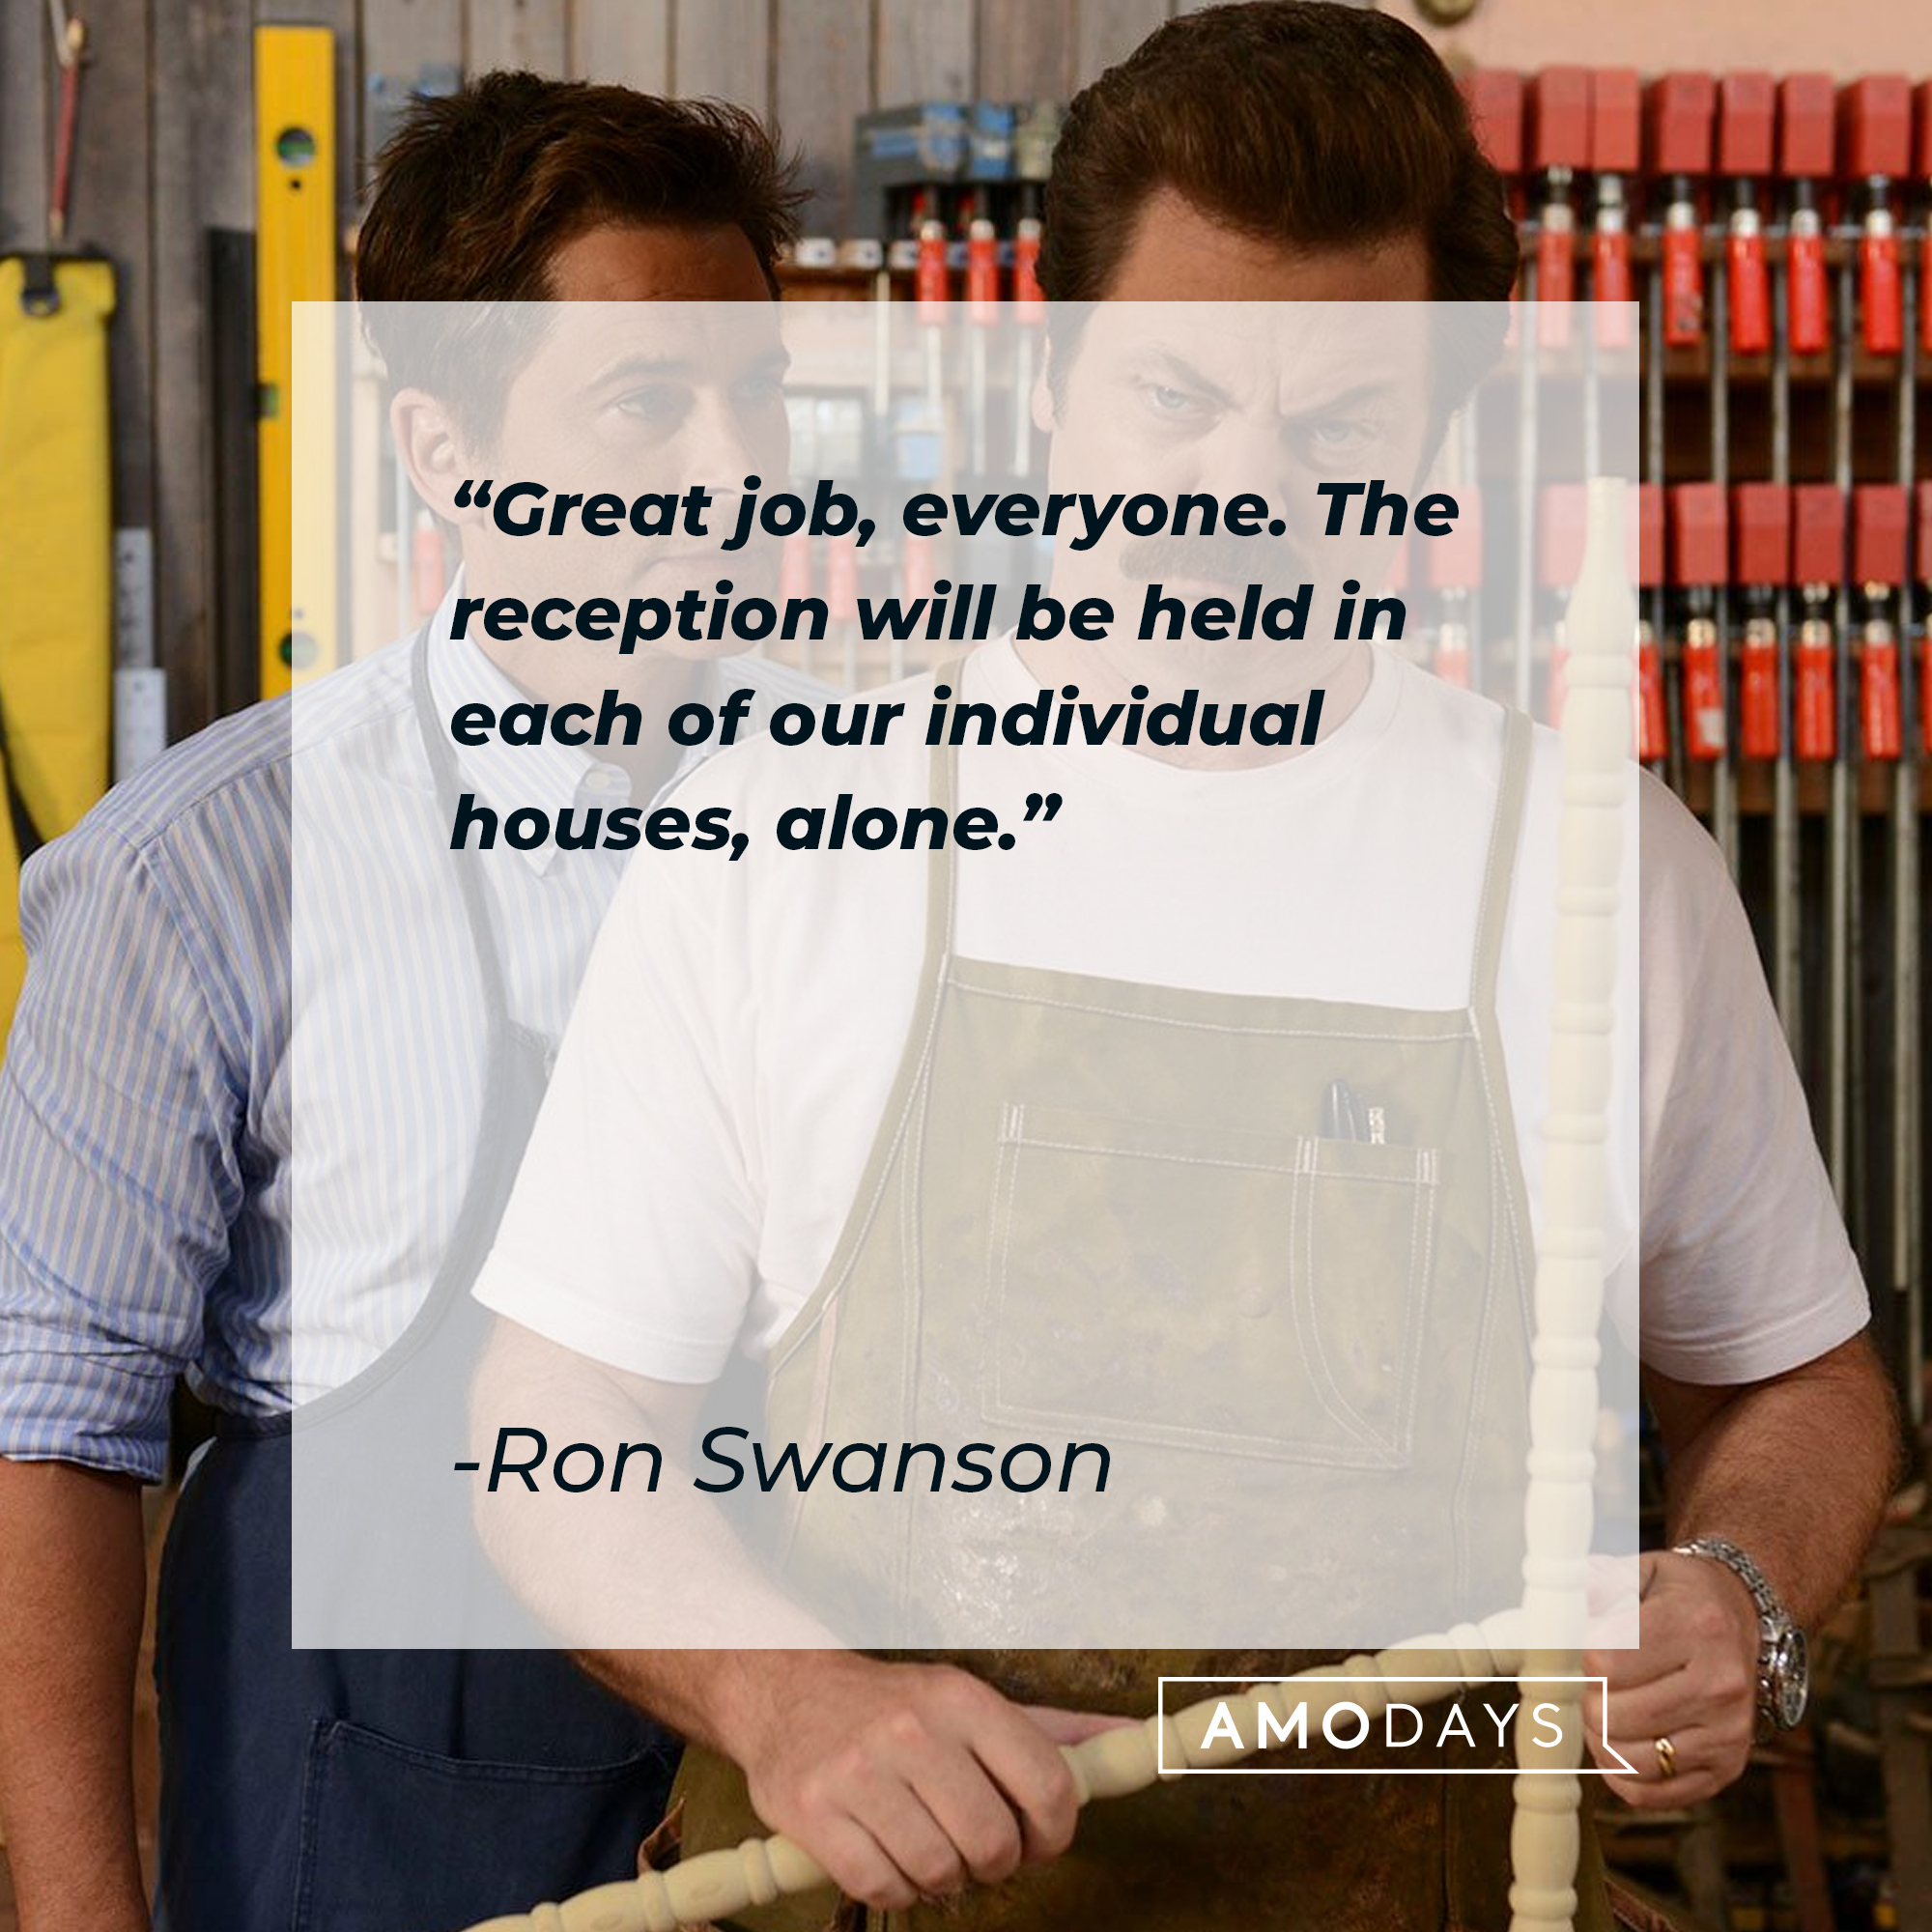 Ron Swanson’s quote: "Great job, everyone. The reception will be held in each of our individual houses, alone." | Image: Facebook.com/parksandrecreation